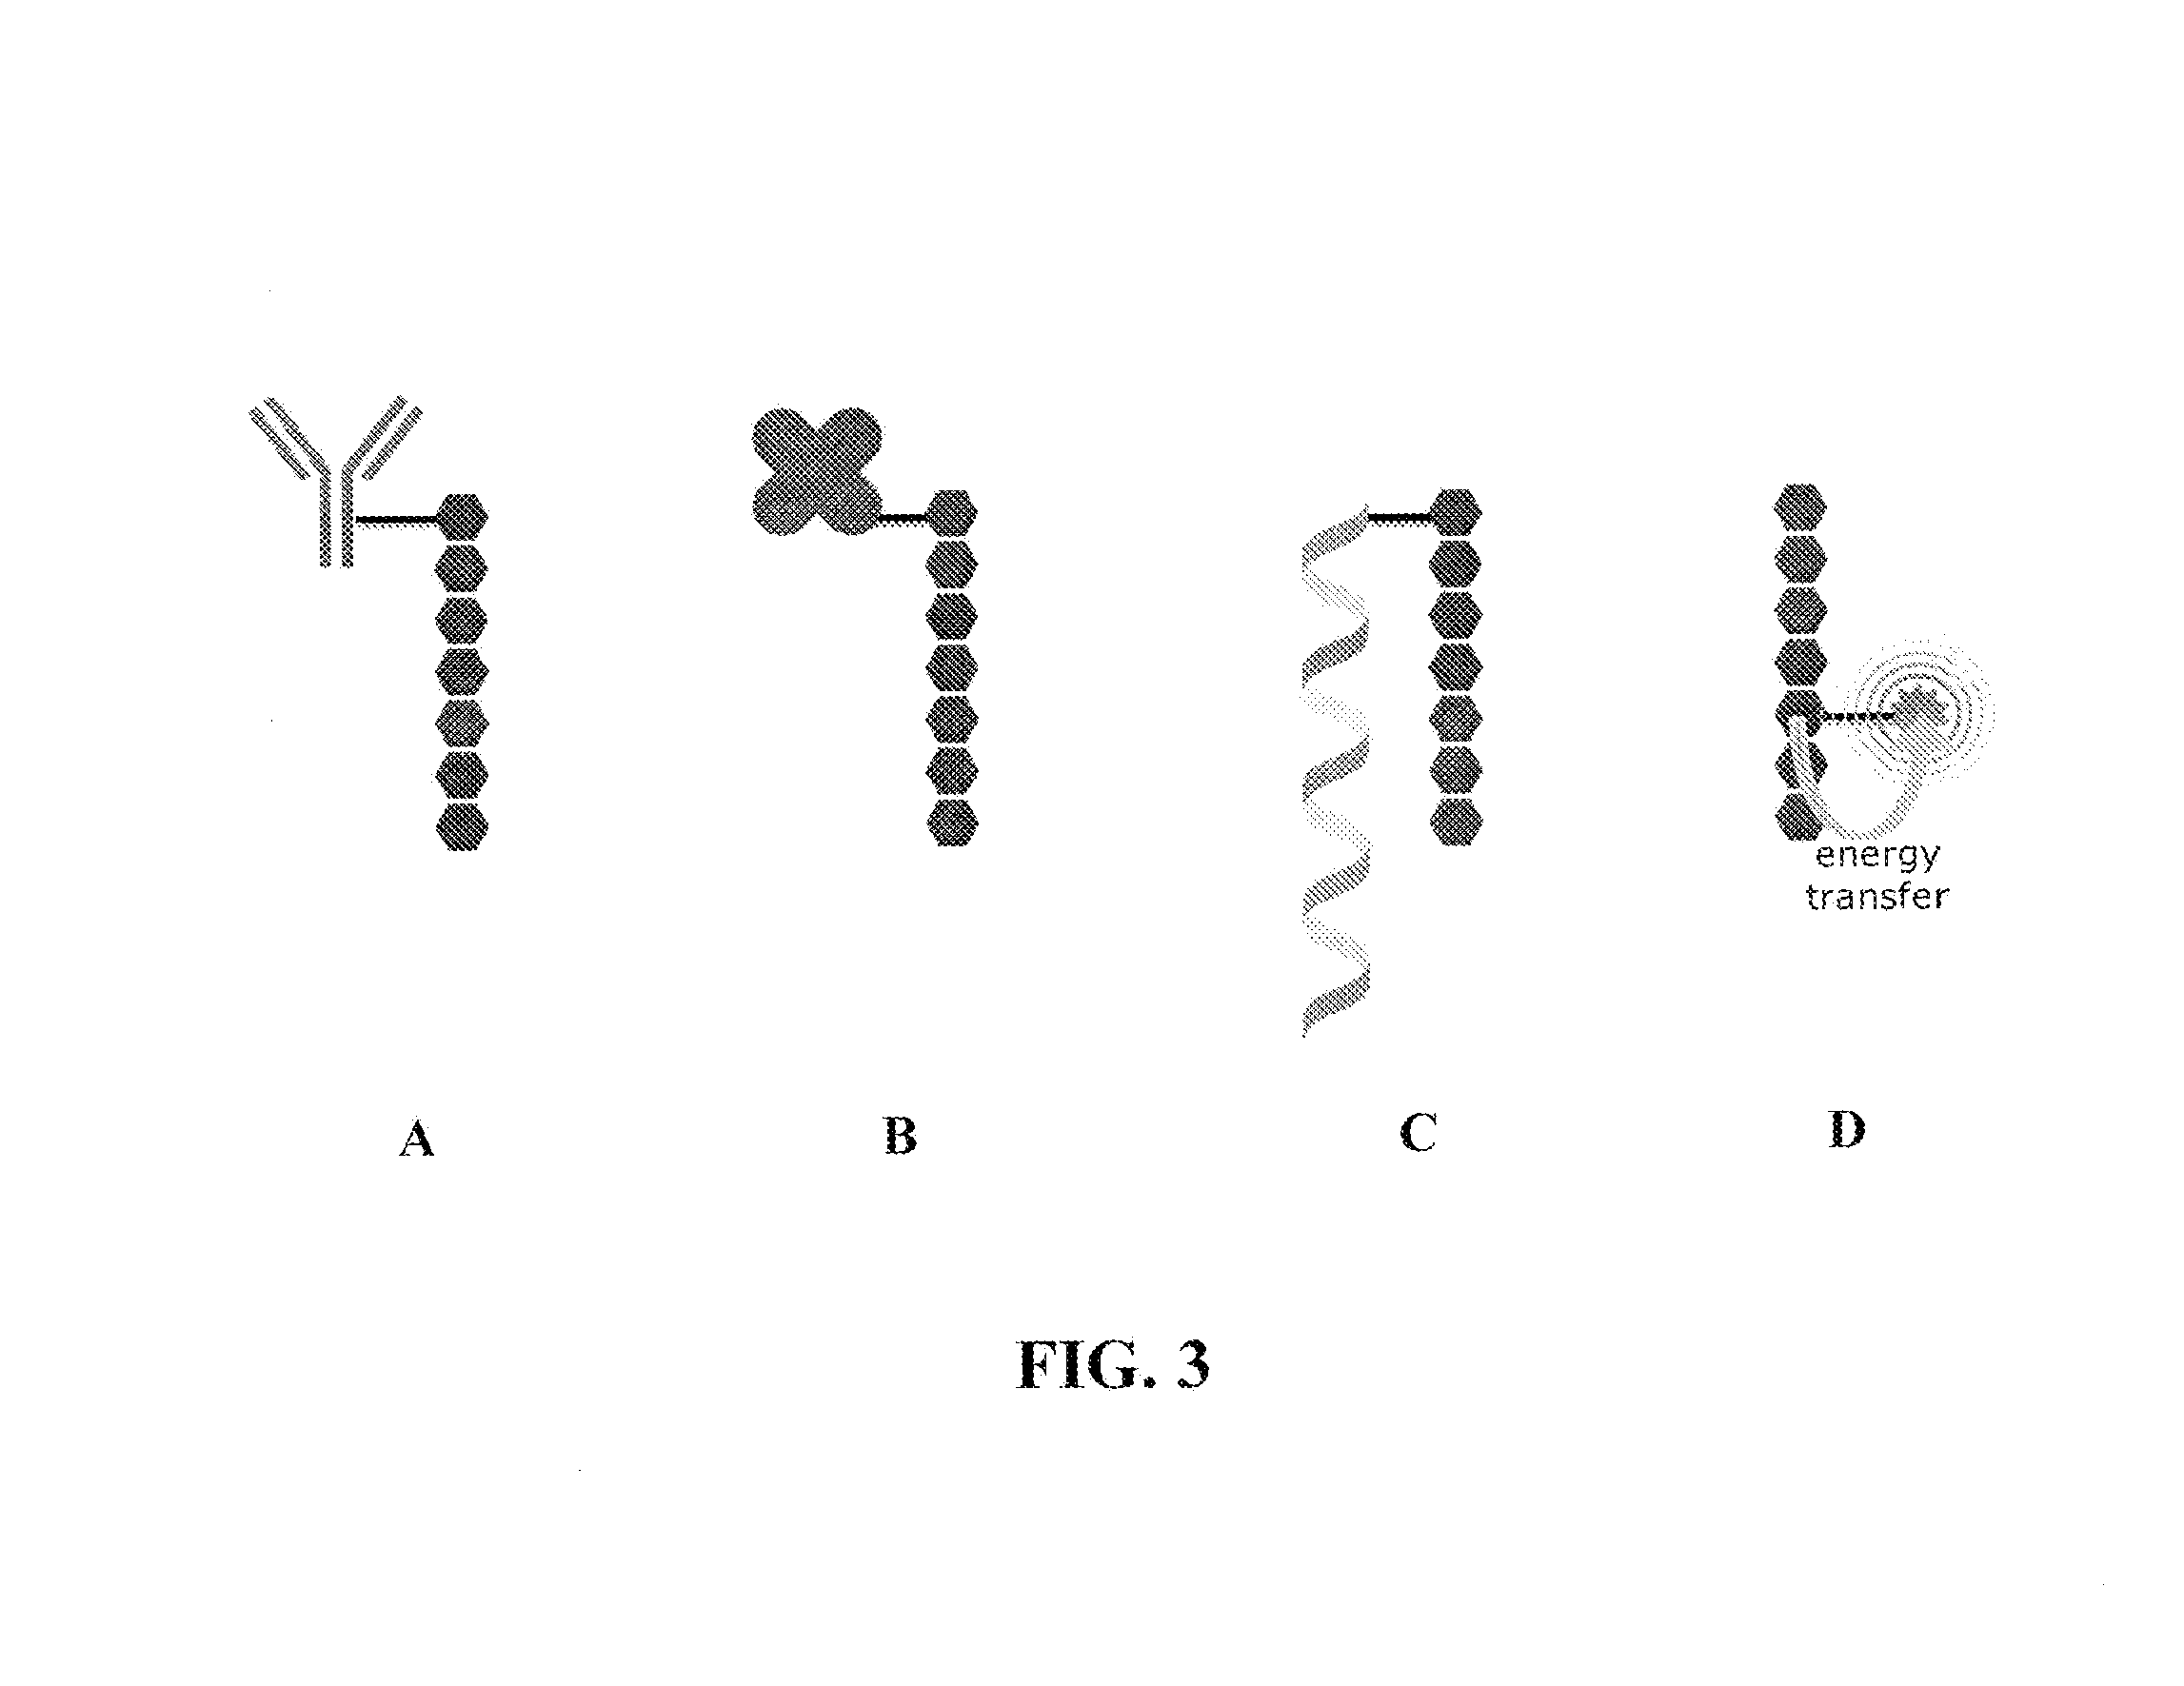 Reagents for directed biomarker signal amplification